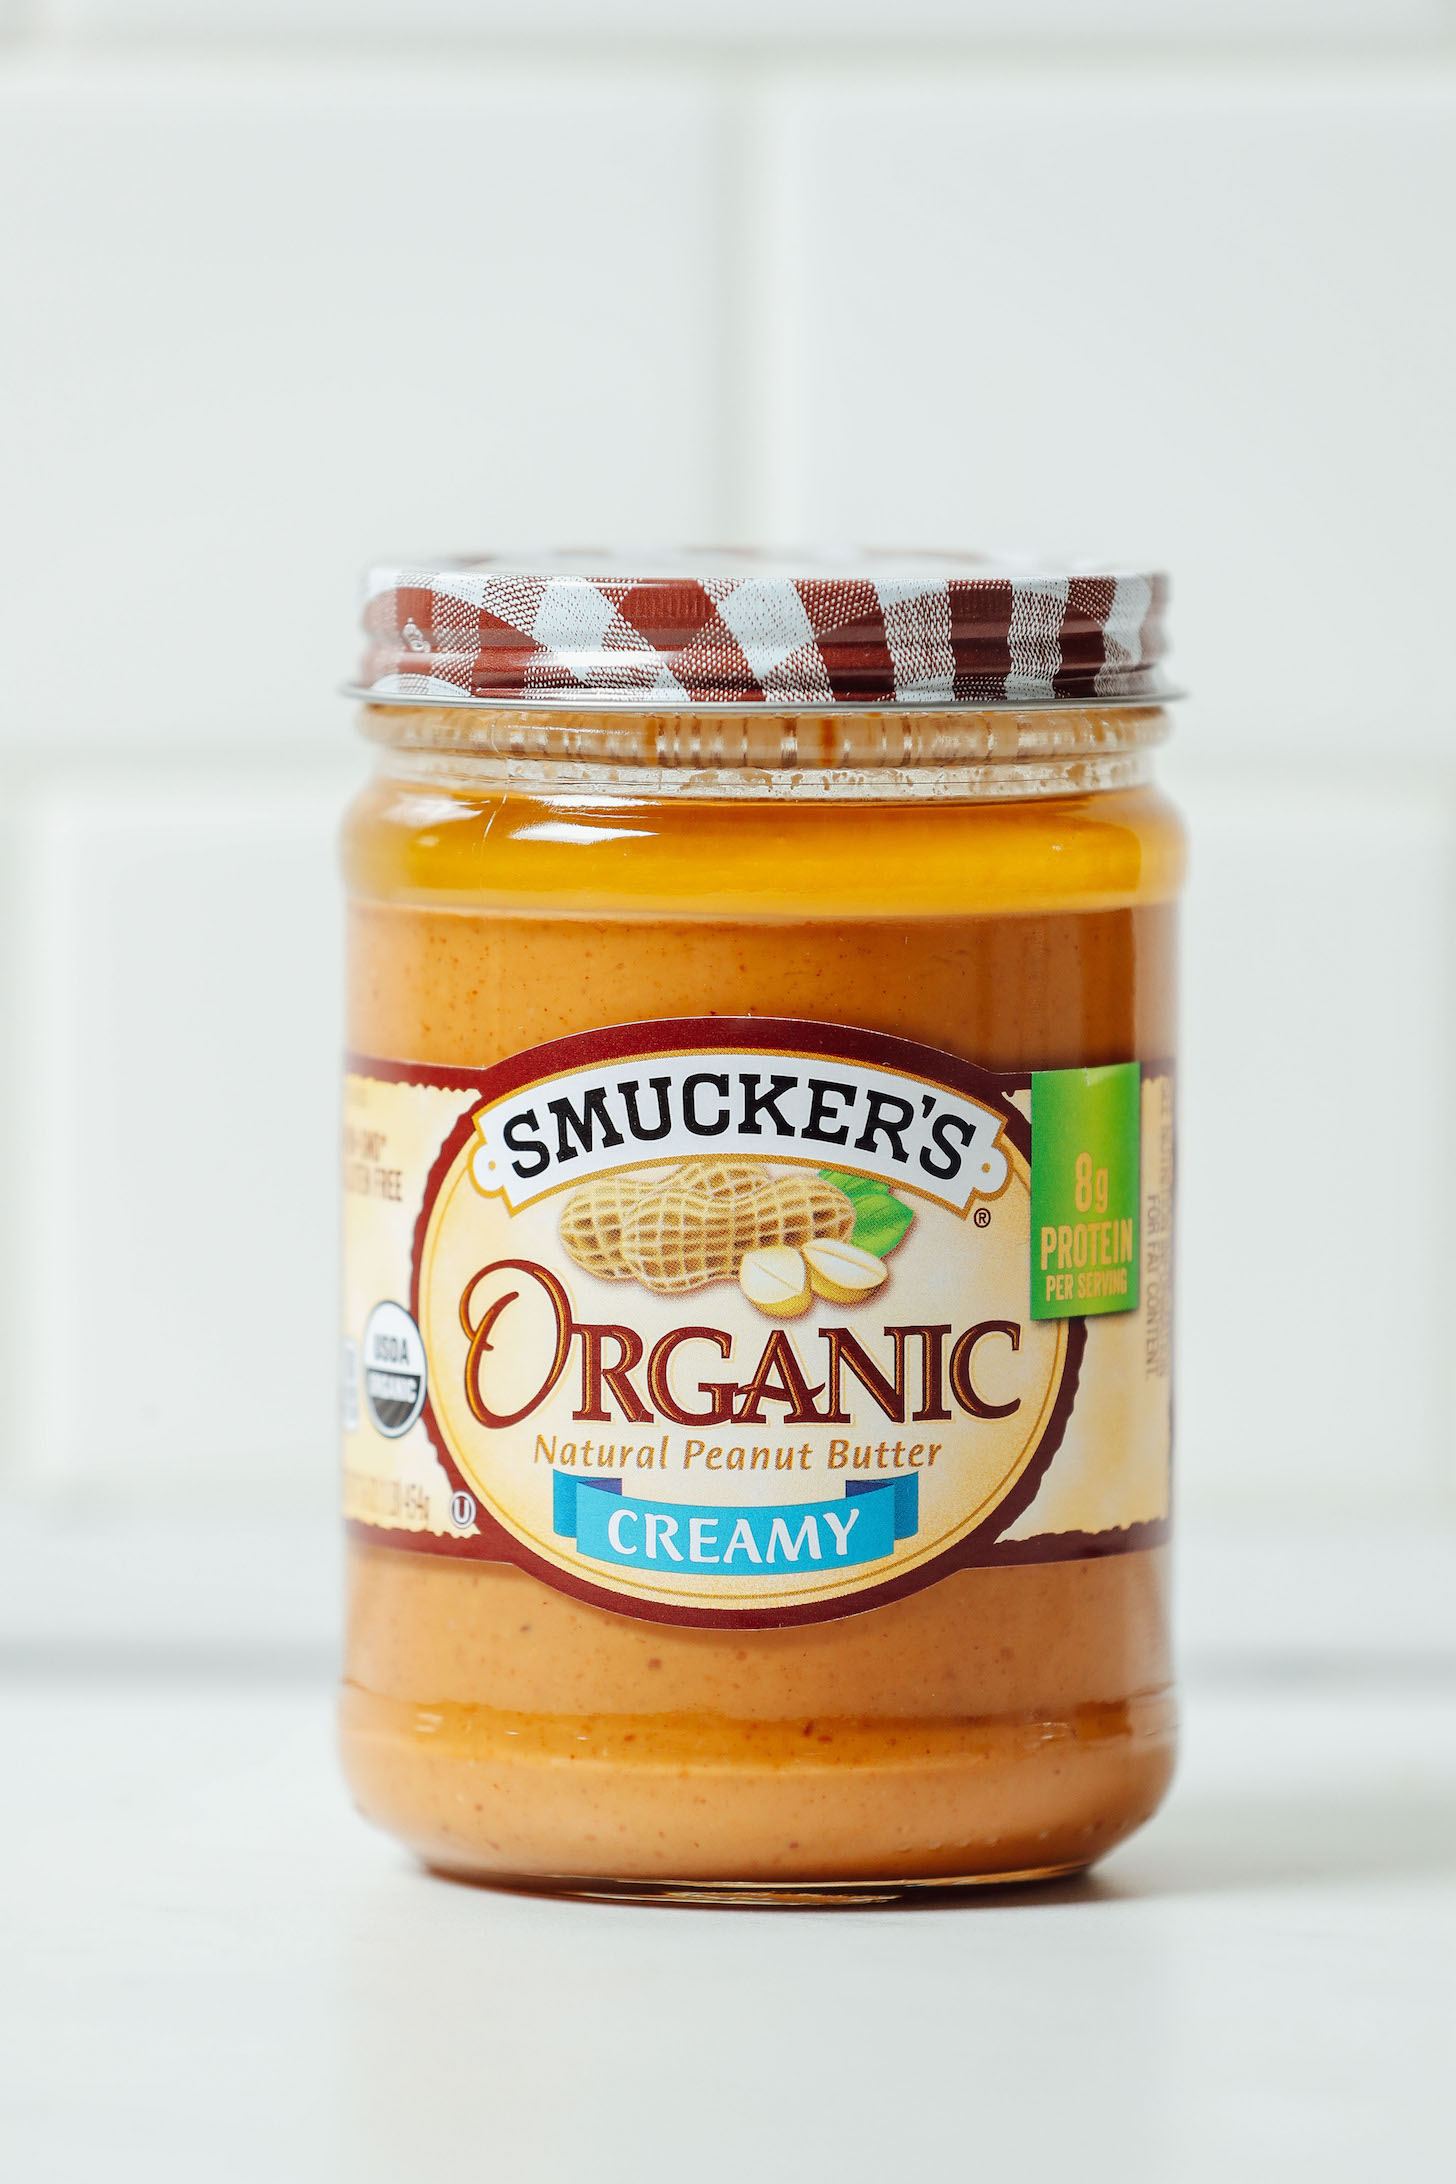 Jar of Smucker's Organic Peanut Butter for our review of the best brands of natural peanut butter